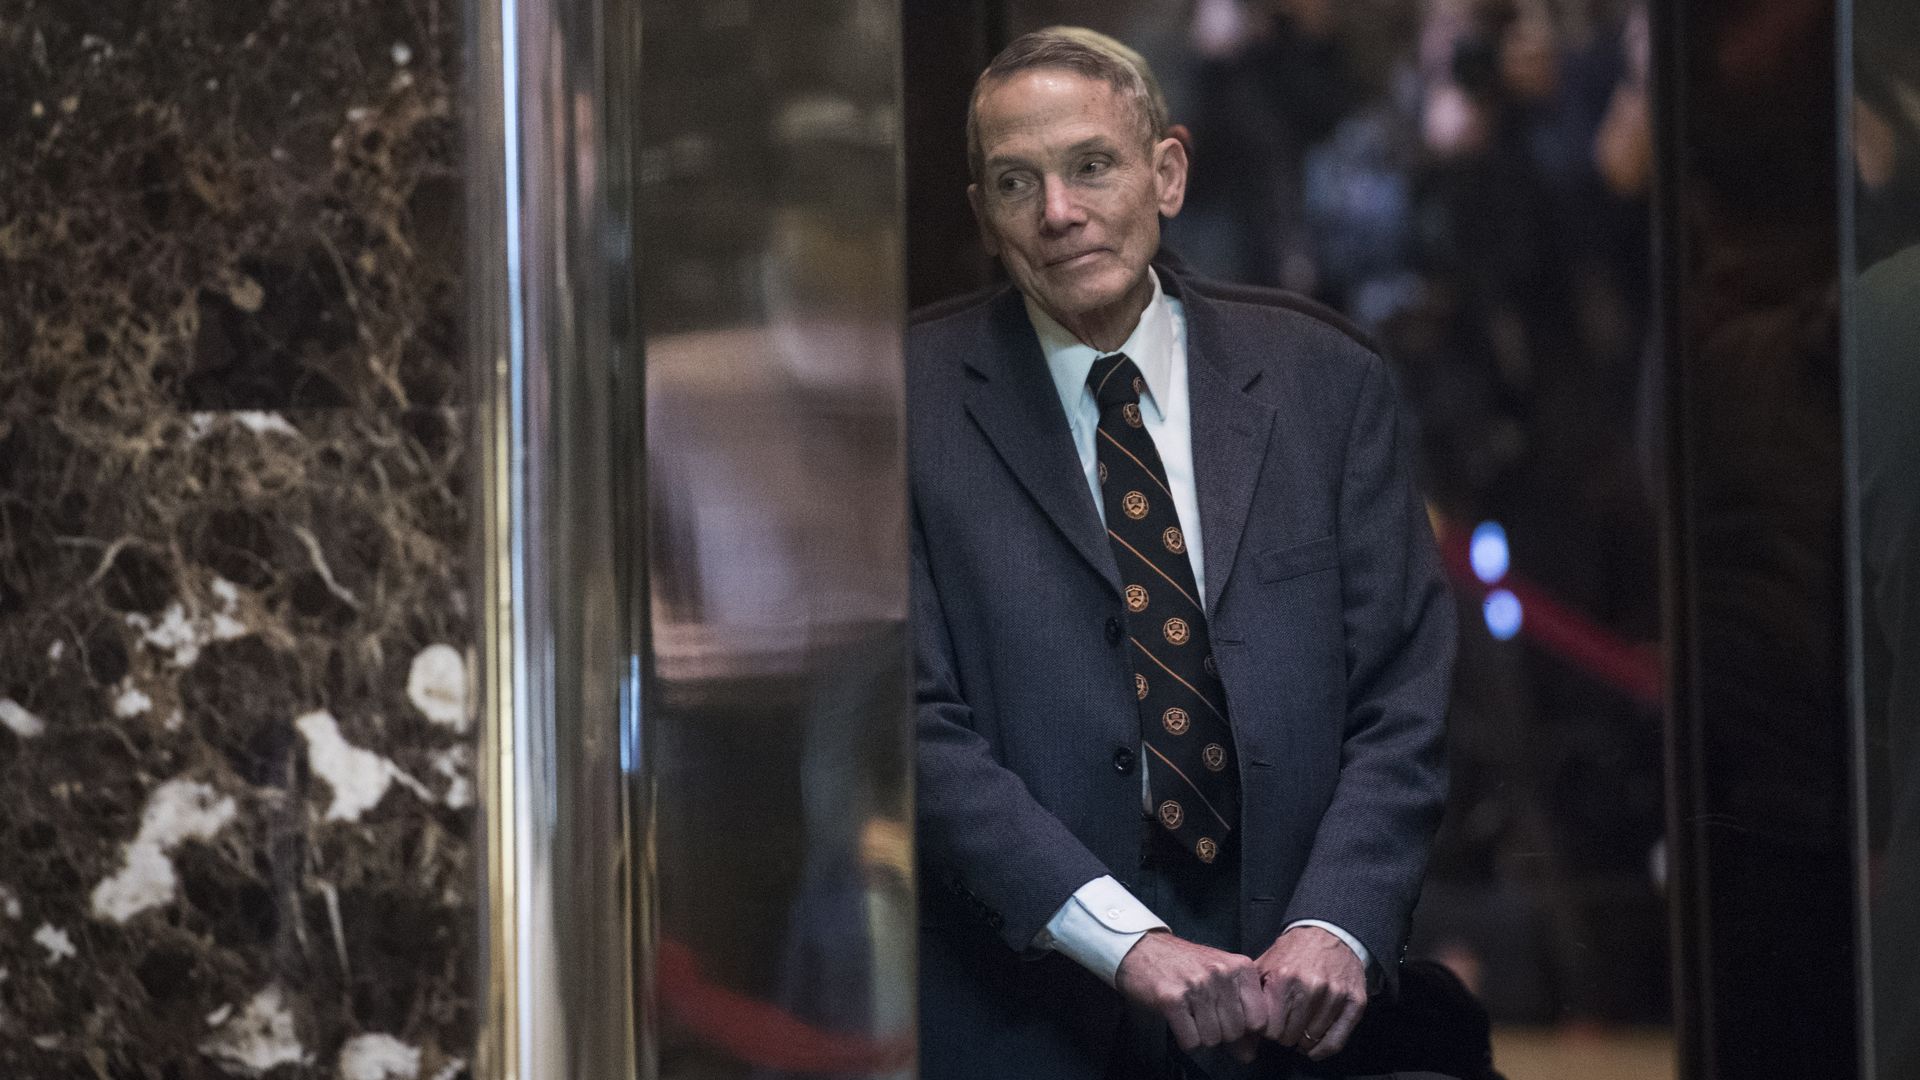 Physicist William Happer arrives in the lobby of Trump Tower in New York, N.Y.